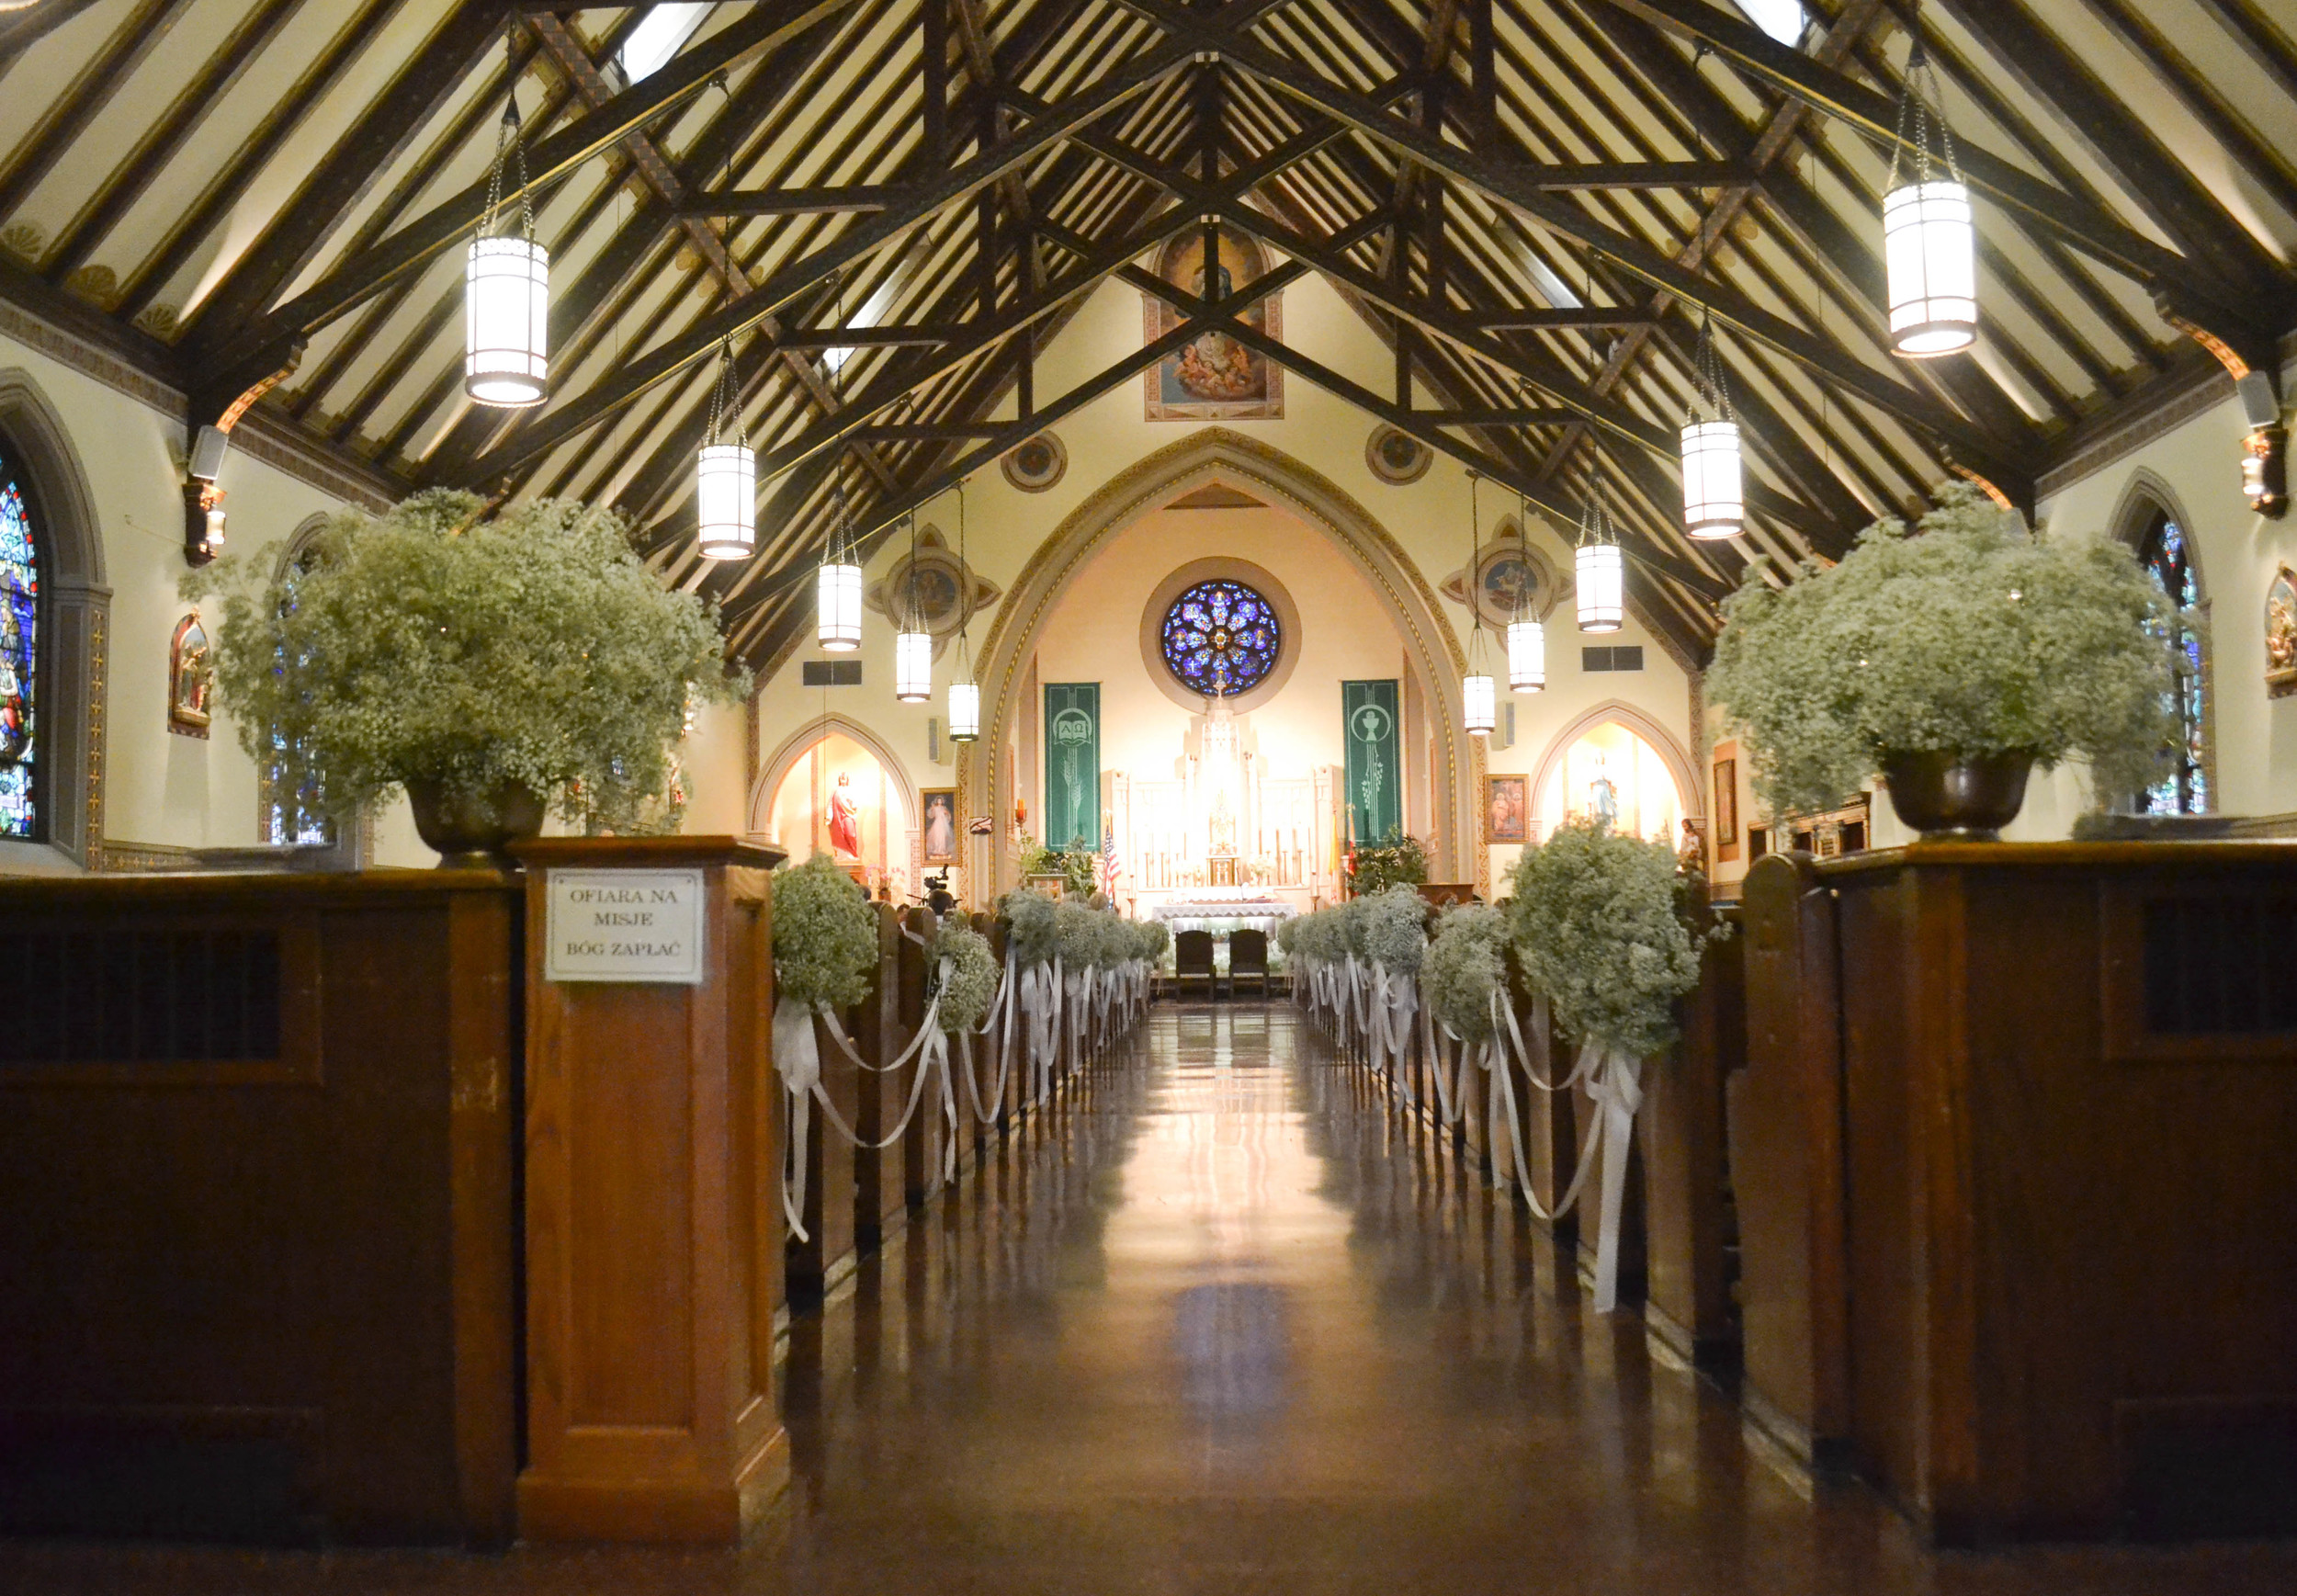 St. Cyril and Methodious Church, Greenpoint Church wedding. Baby's breath church decorations.